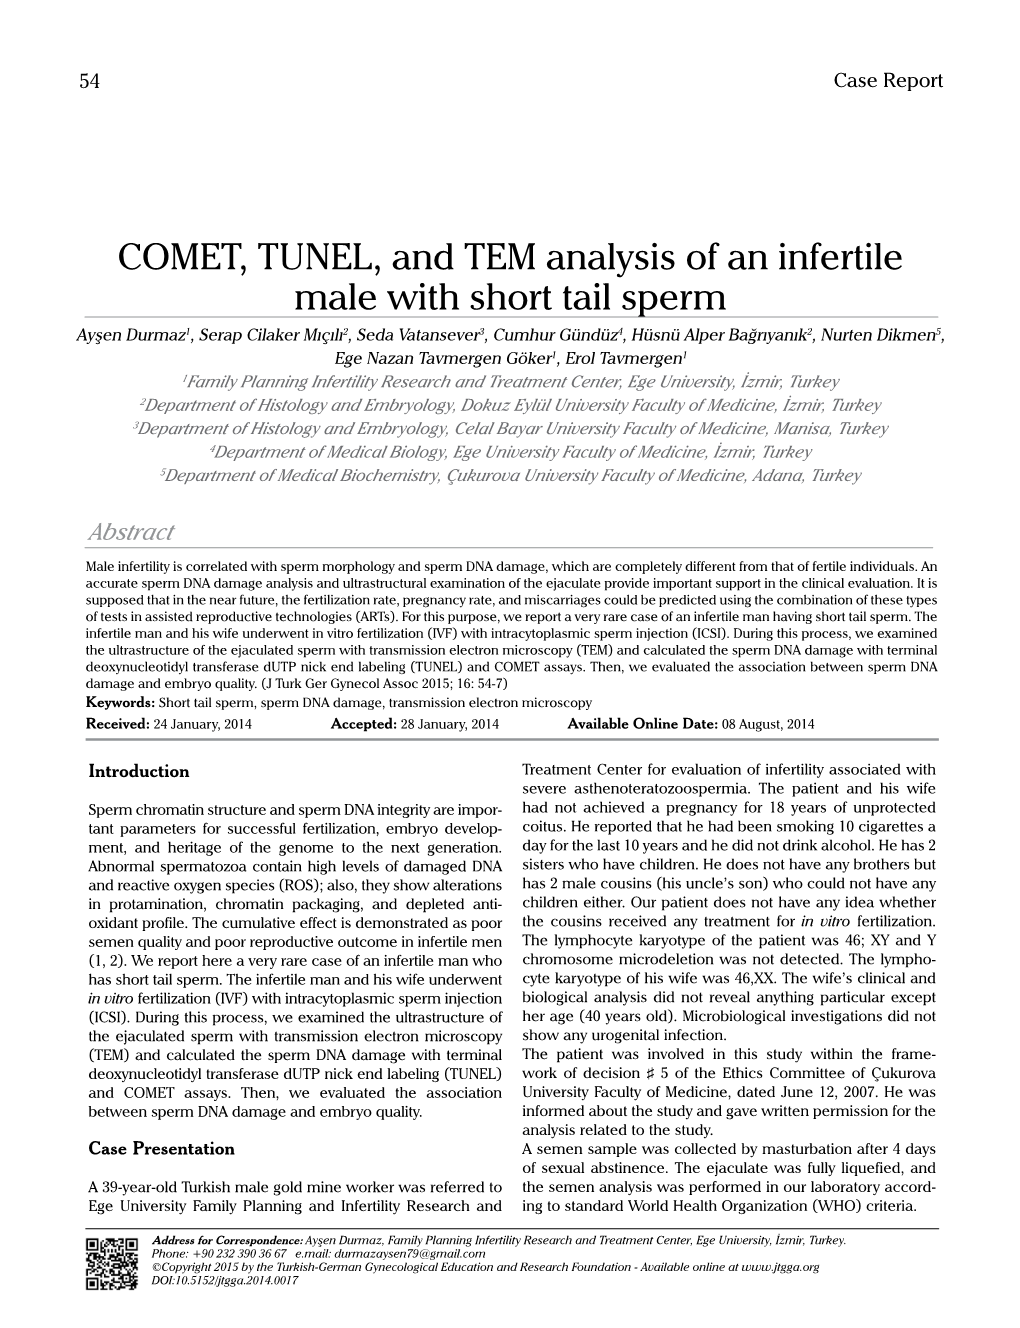 COMET, TUNEL, and TEM Analysis of an Infertile Male with Short Tail Sperm